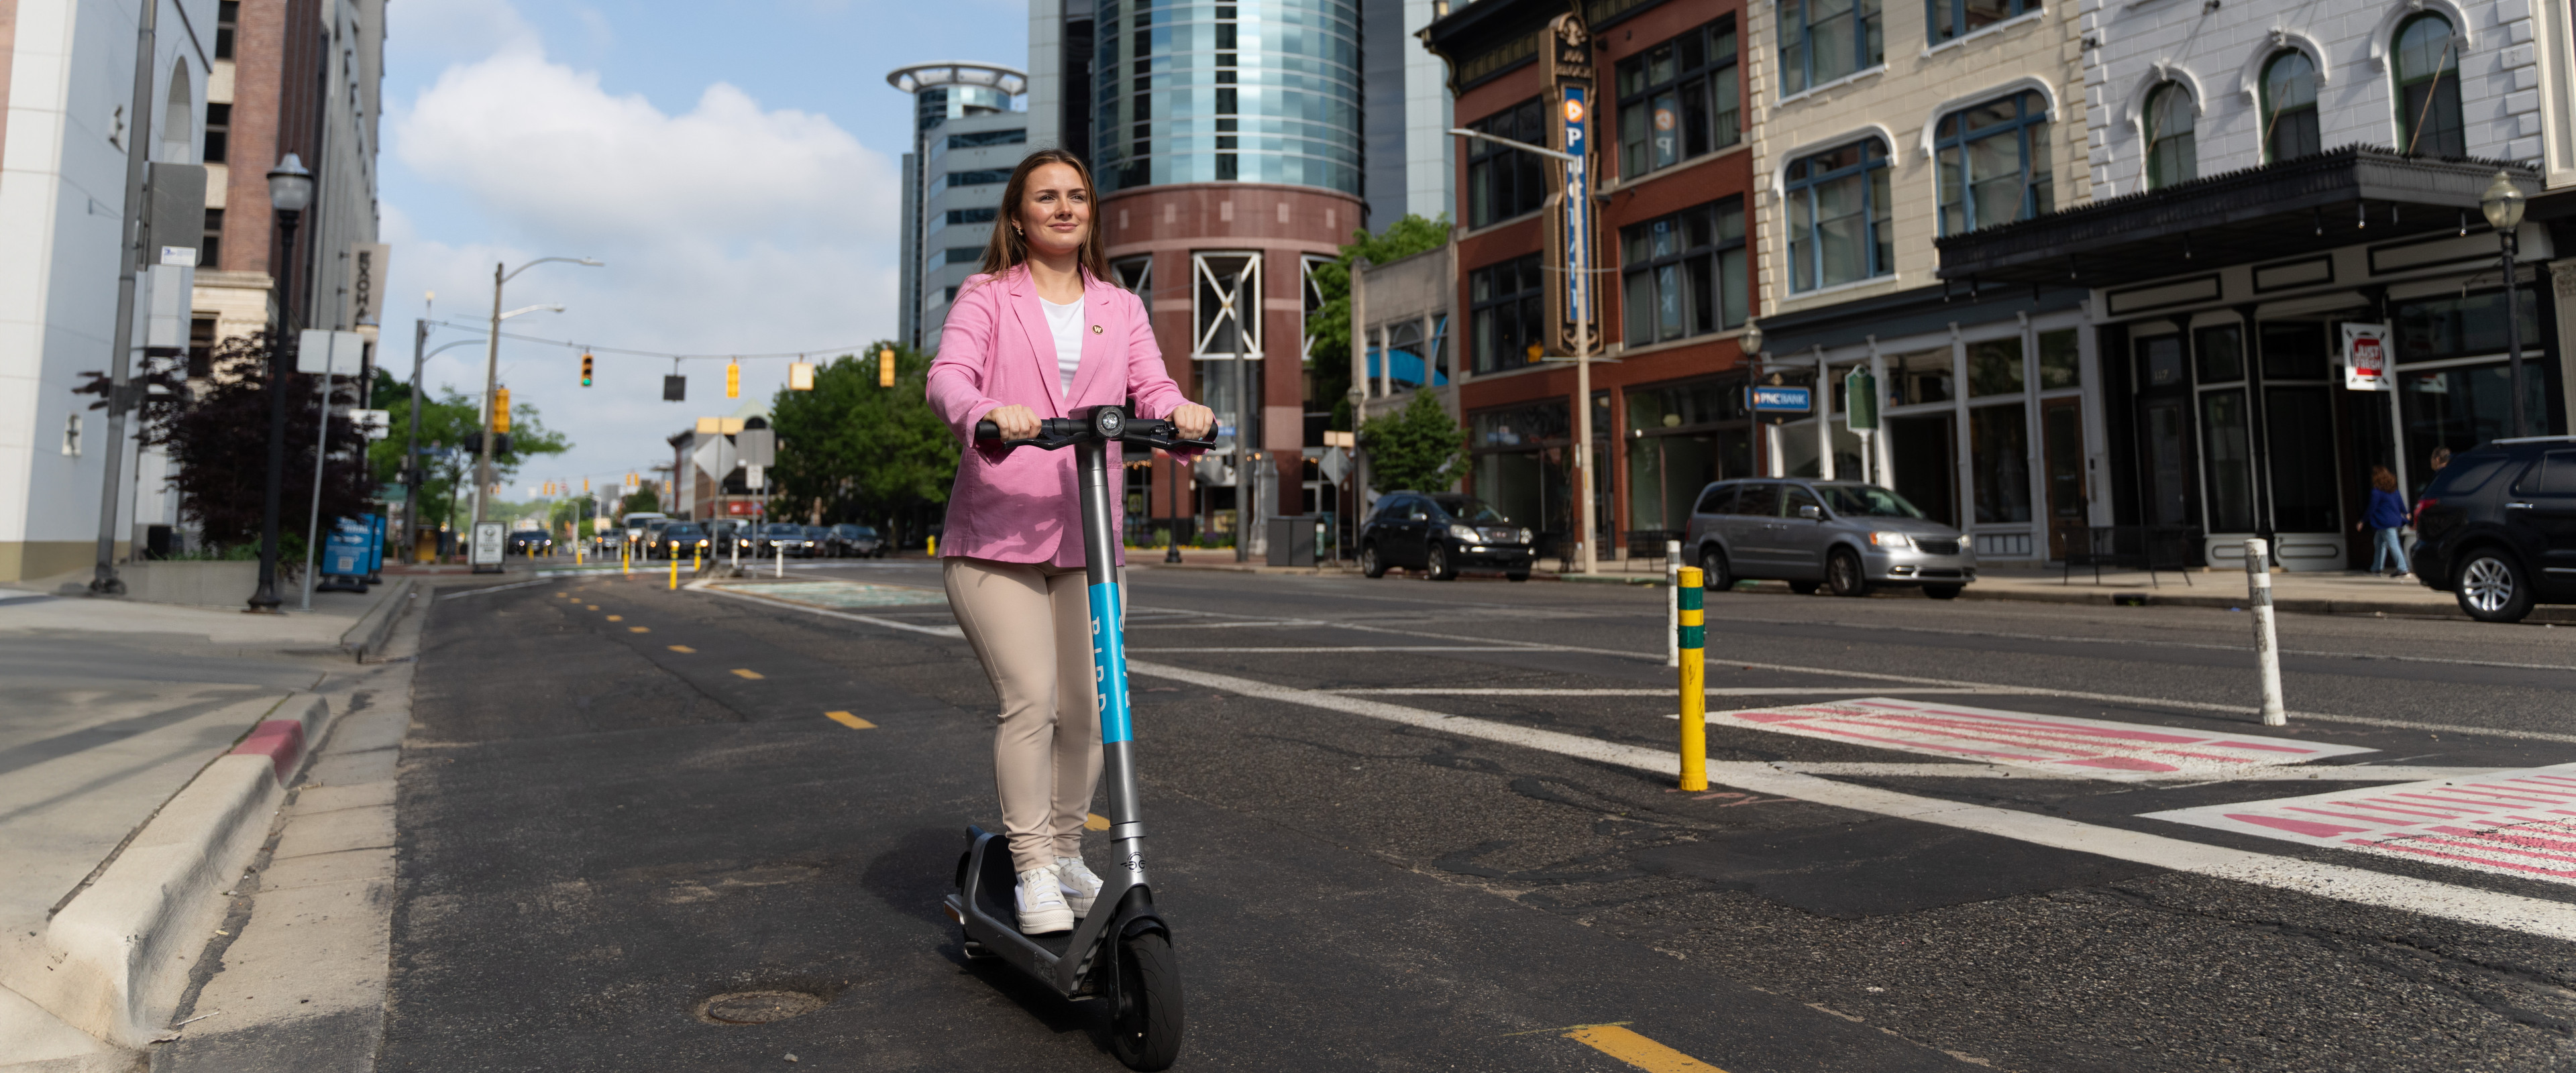 A young woman rides an electric scooter through town